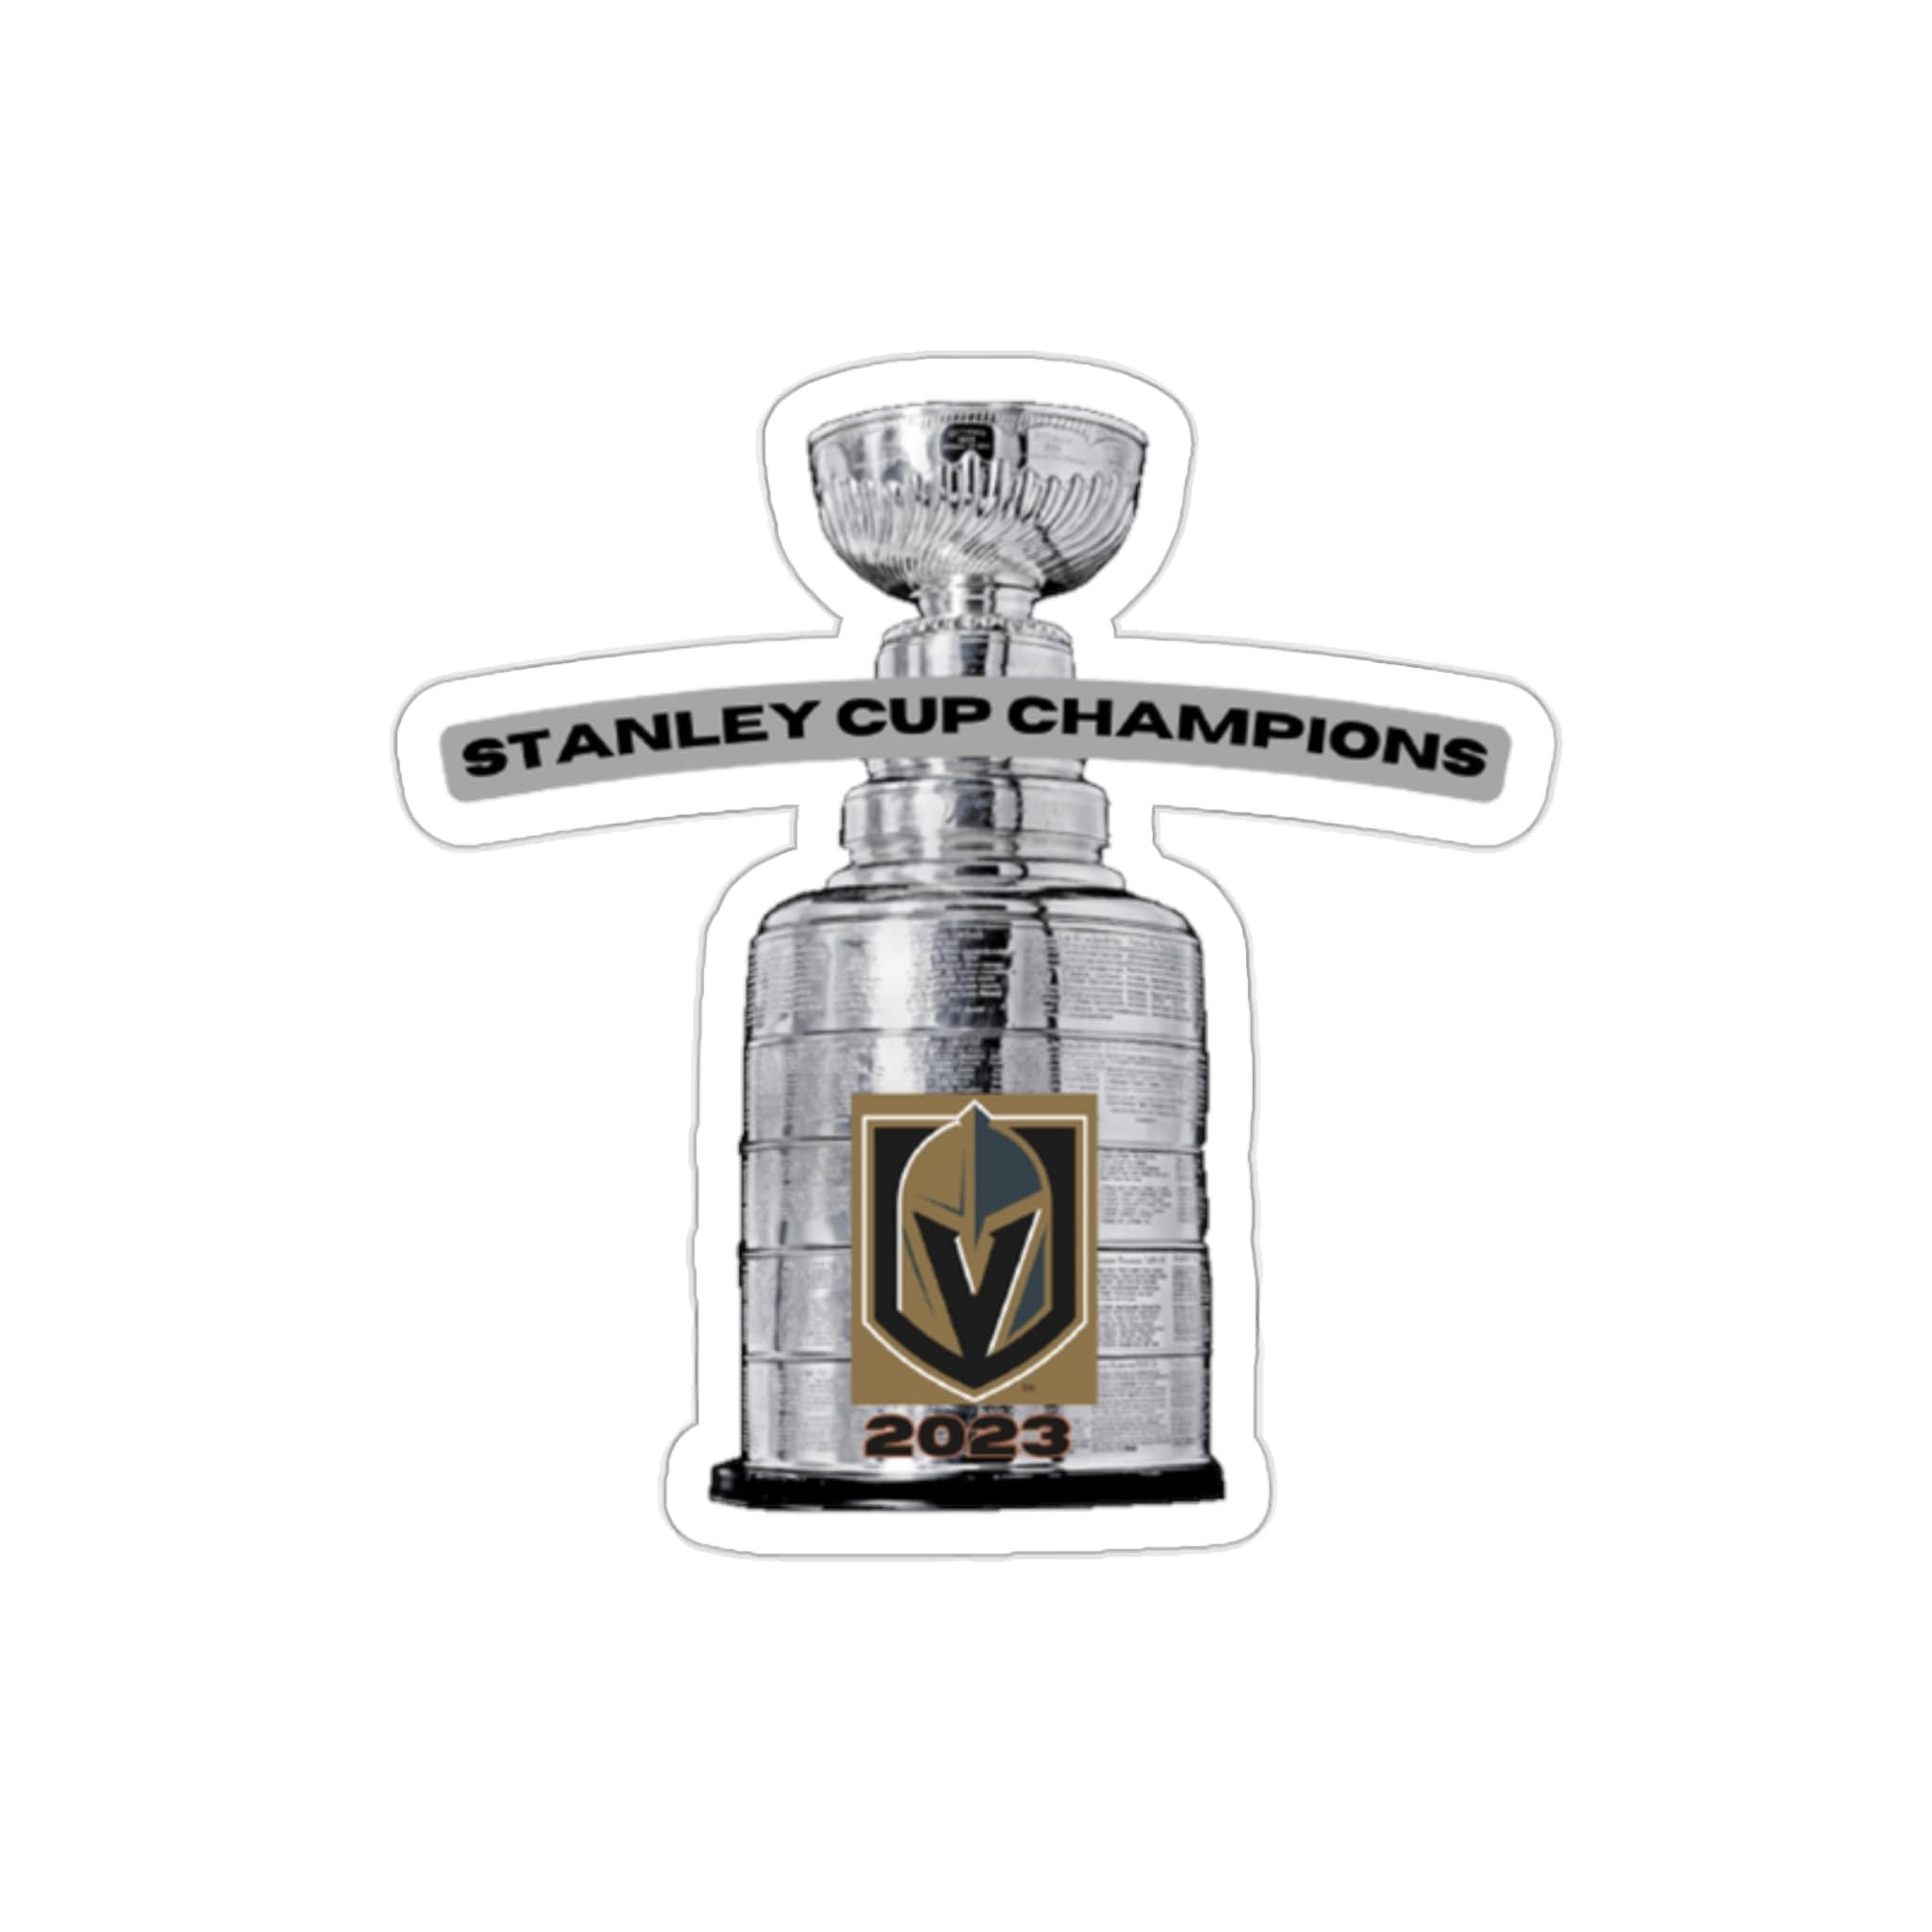  Las Vegas Golden Knights 2023 Stanley Cup Champions Team NHL  National Hockey League Sticker Vinyl Decal Laptop Water Bottle Car  Scrapbook (2023 Stanley Cup Champions - Type 2) : Sports & Outdoors